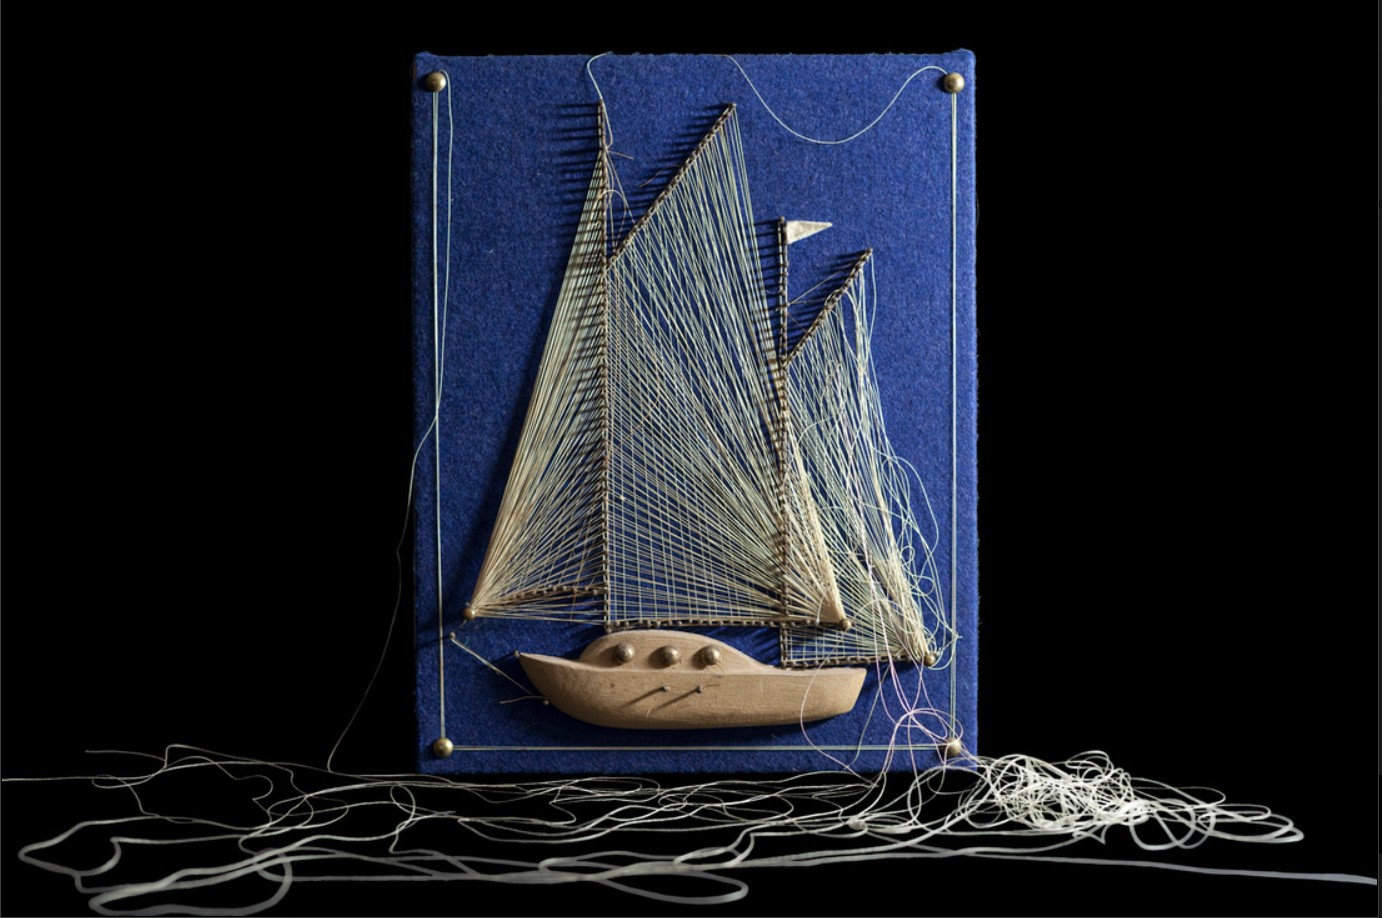 Blue fabric canvas with a boat embroidered into it with string on the floor 